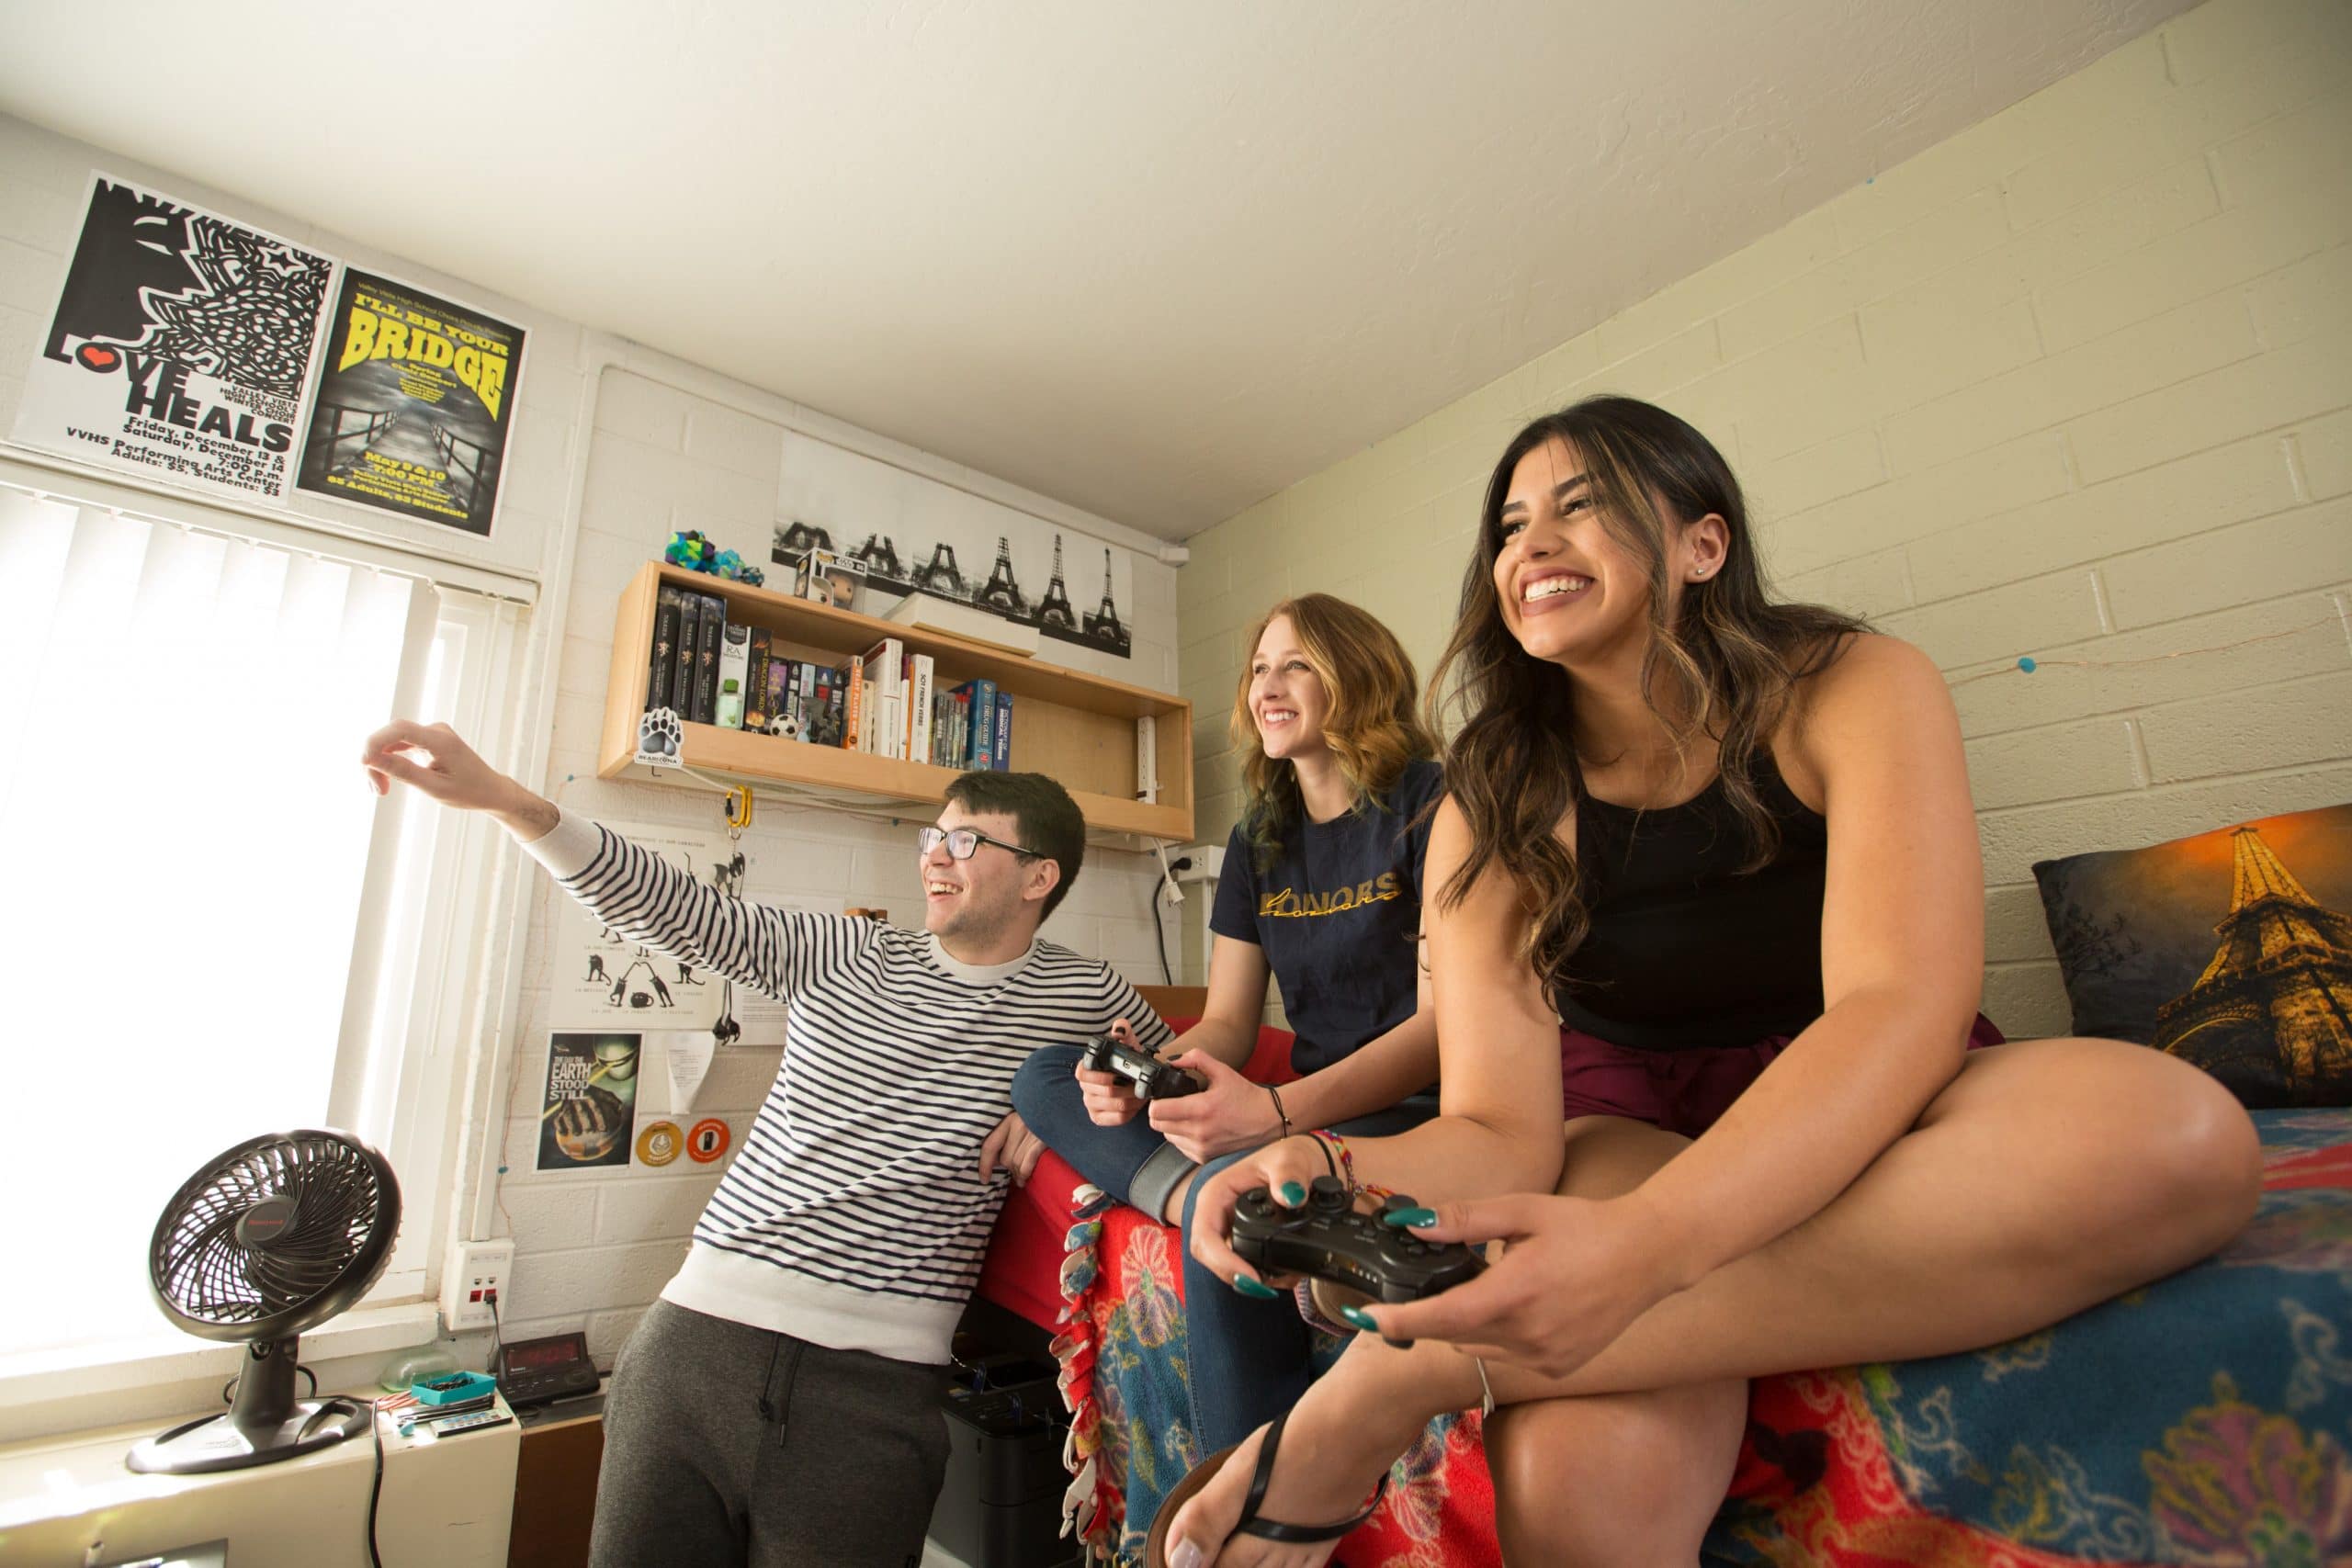 Students playing video games in a dorm room.